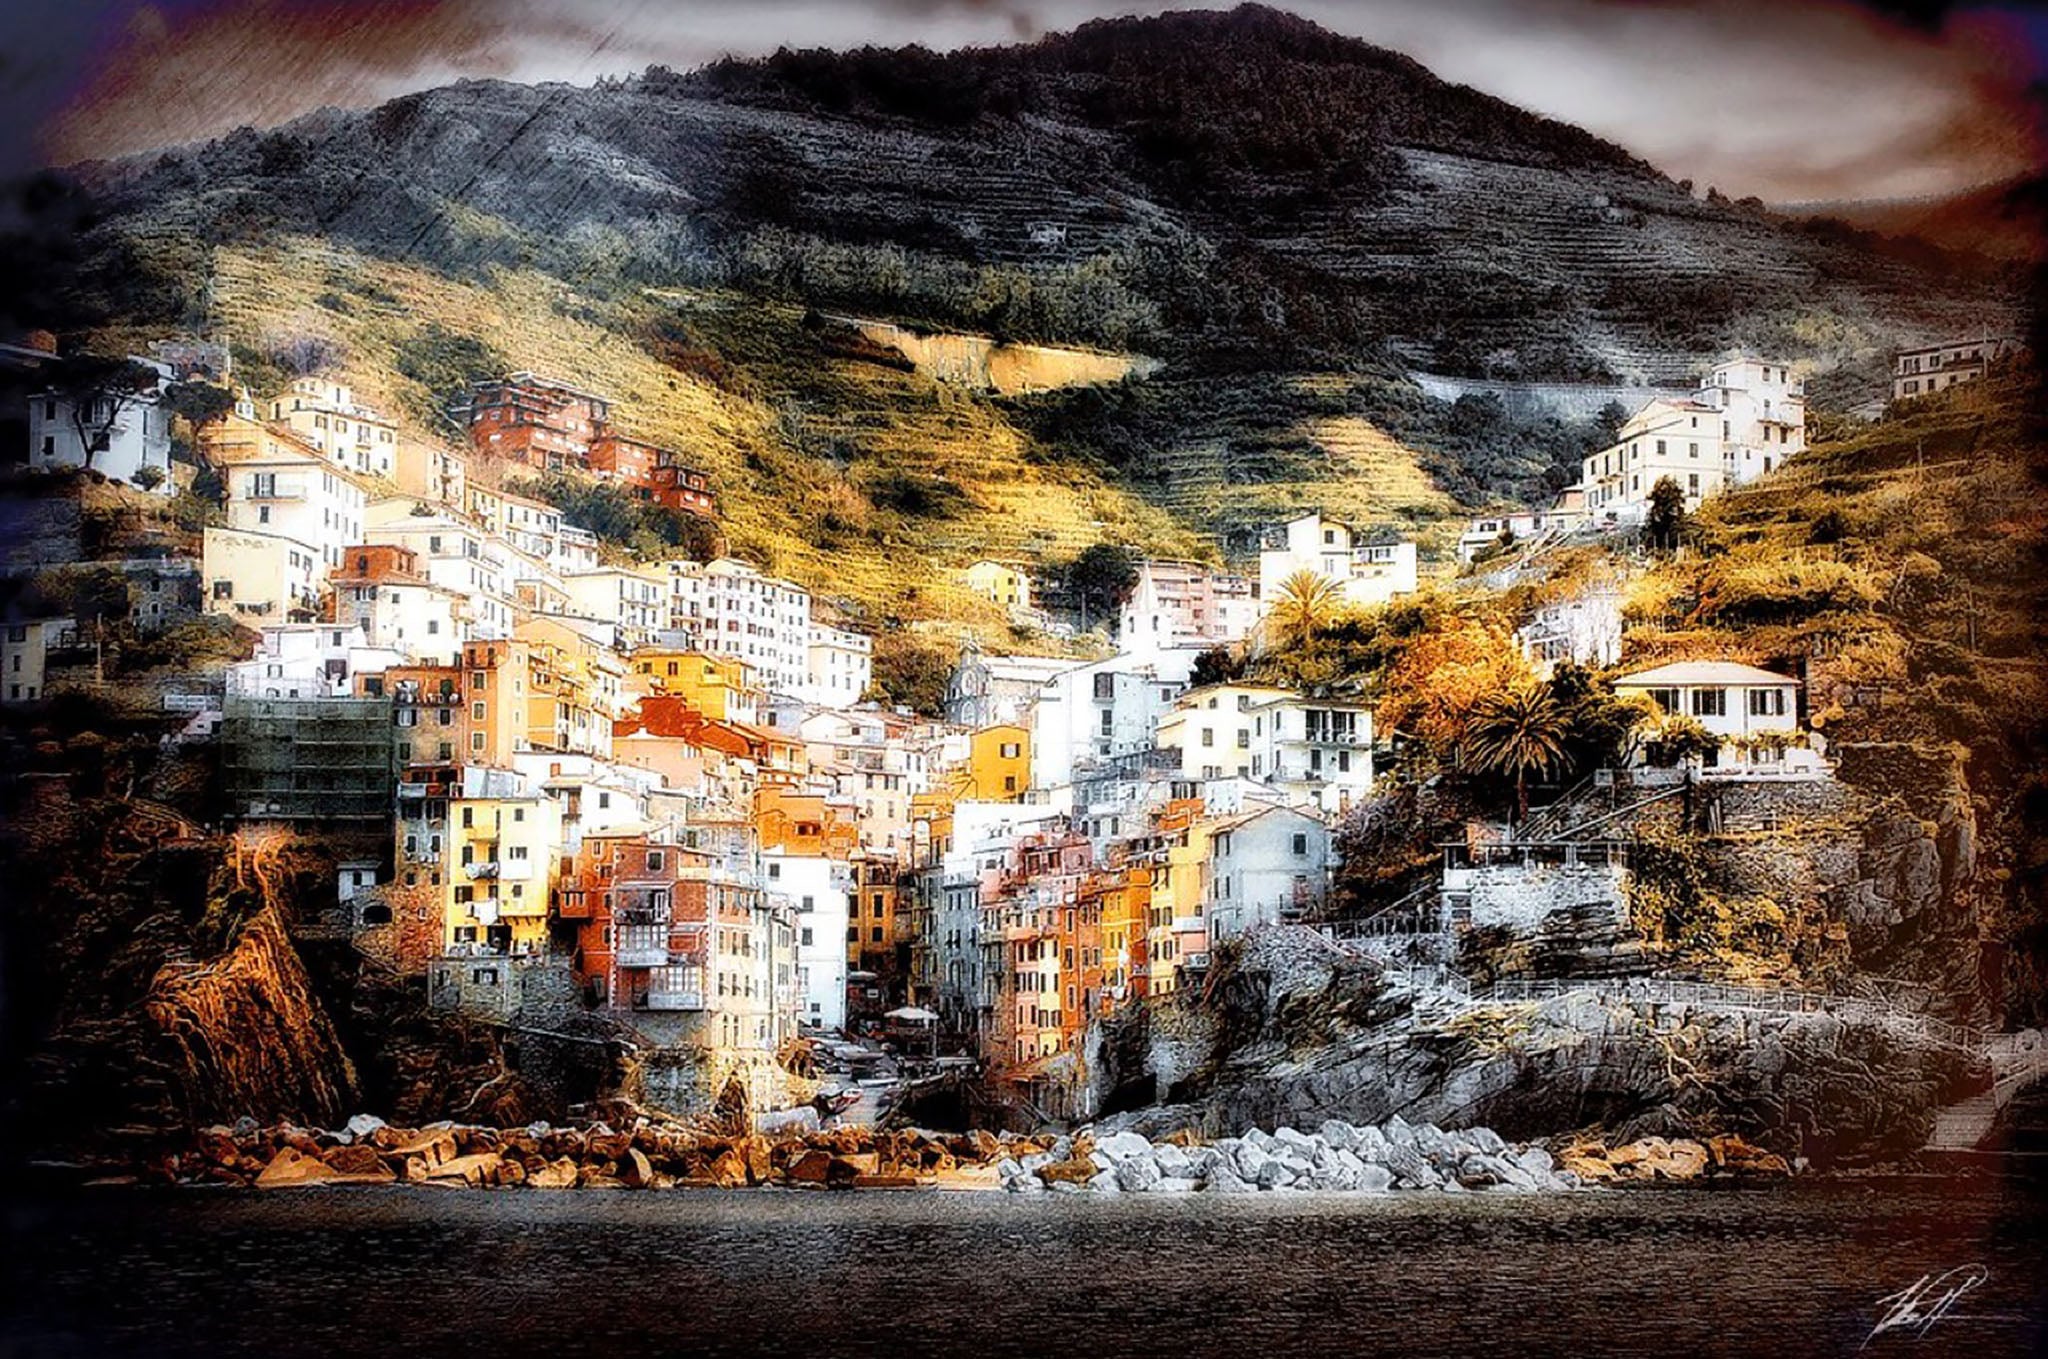 A photograph depicting a town in the bottom of a deep valley next to a body of water. The town is made up of multiple colorful buildings that are a wonderful contrast to the darkness of the hill behind them. There is a filter over the photograph causing the image to appear grainy. 18"x12" photography by Tom Patterson